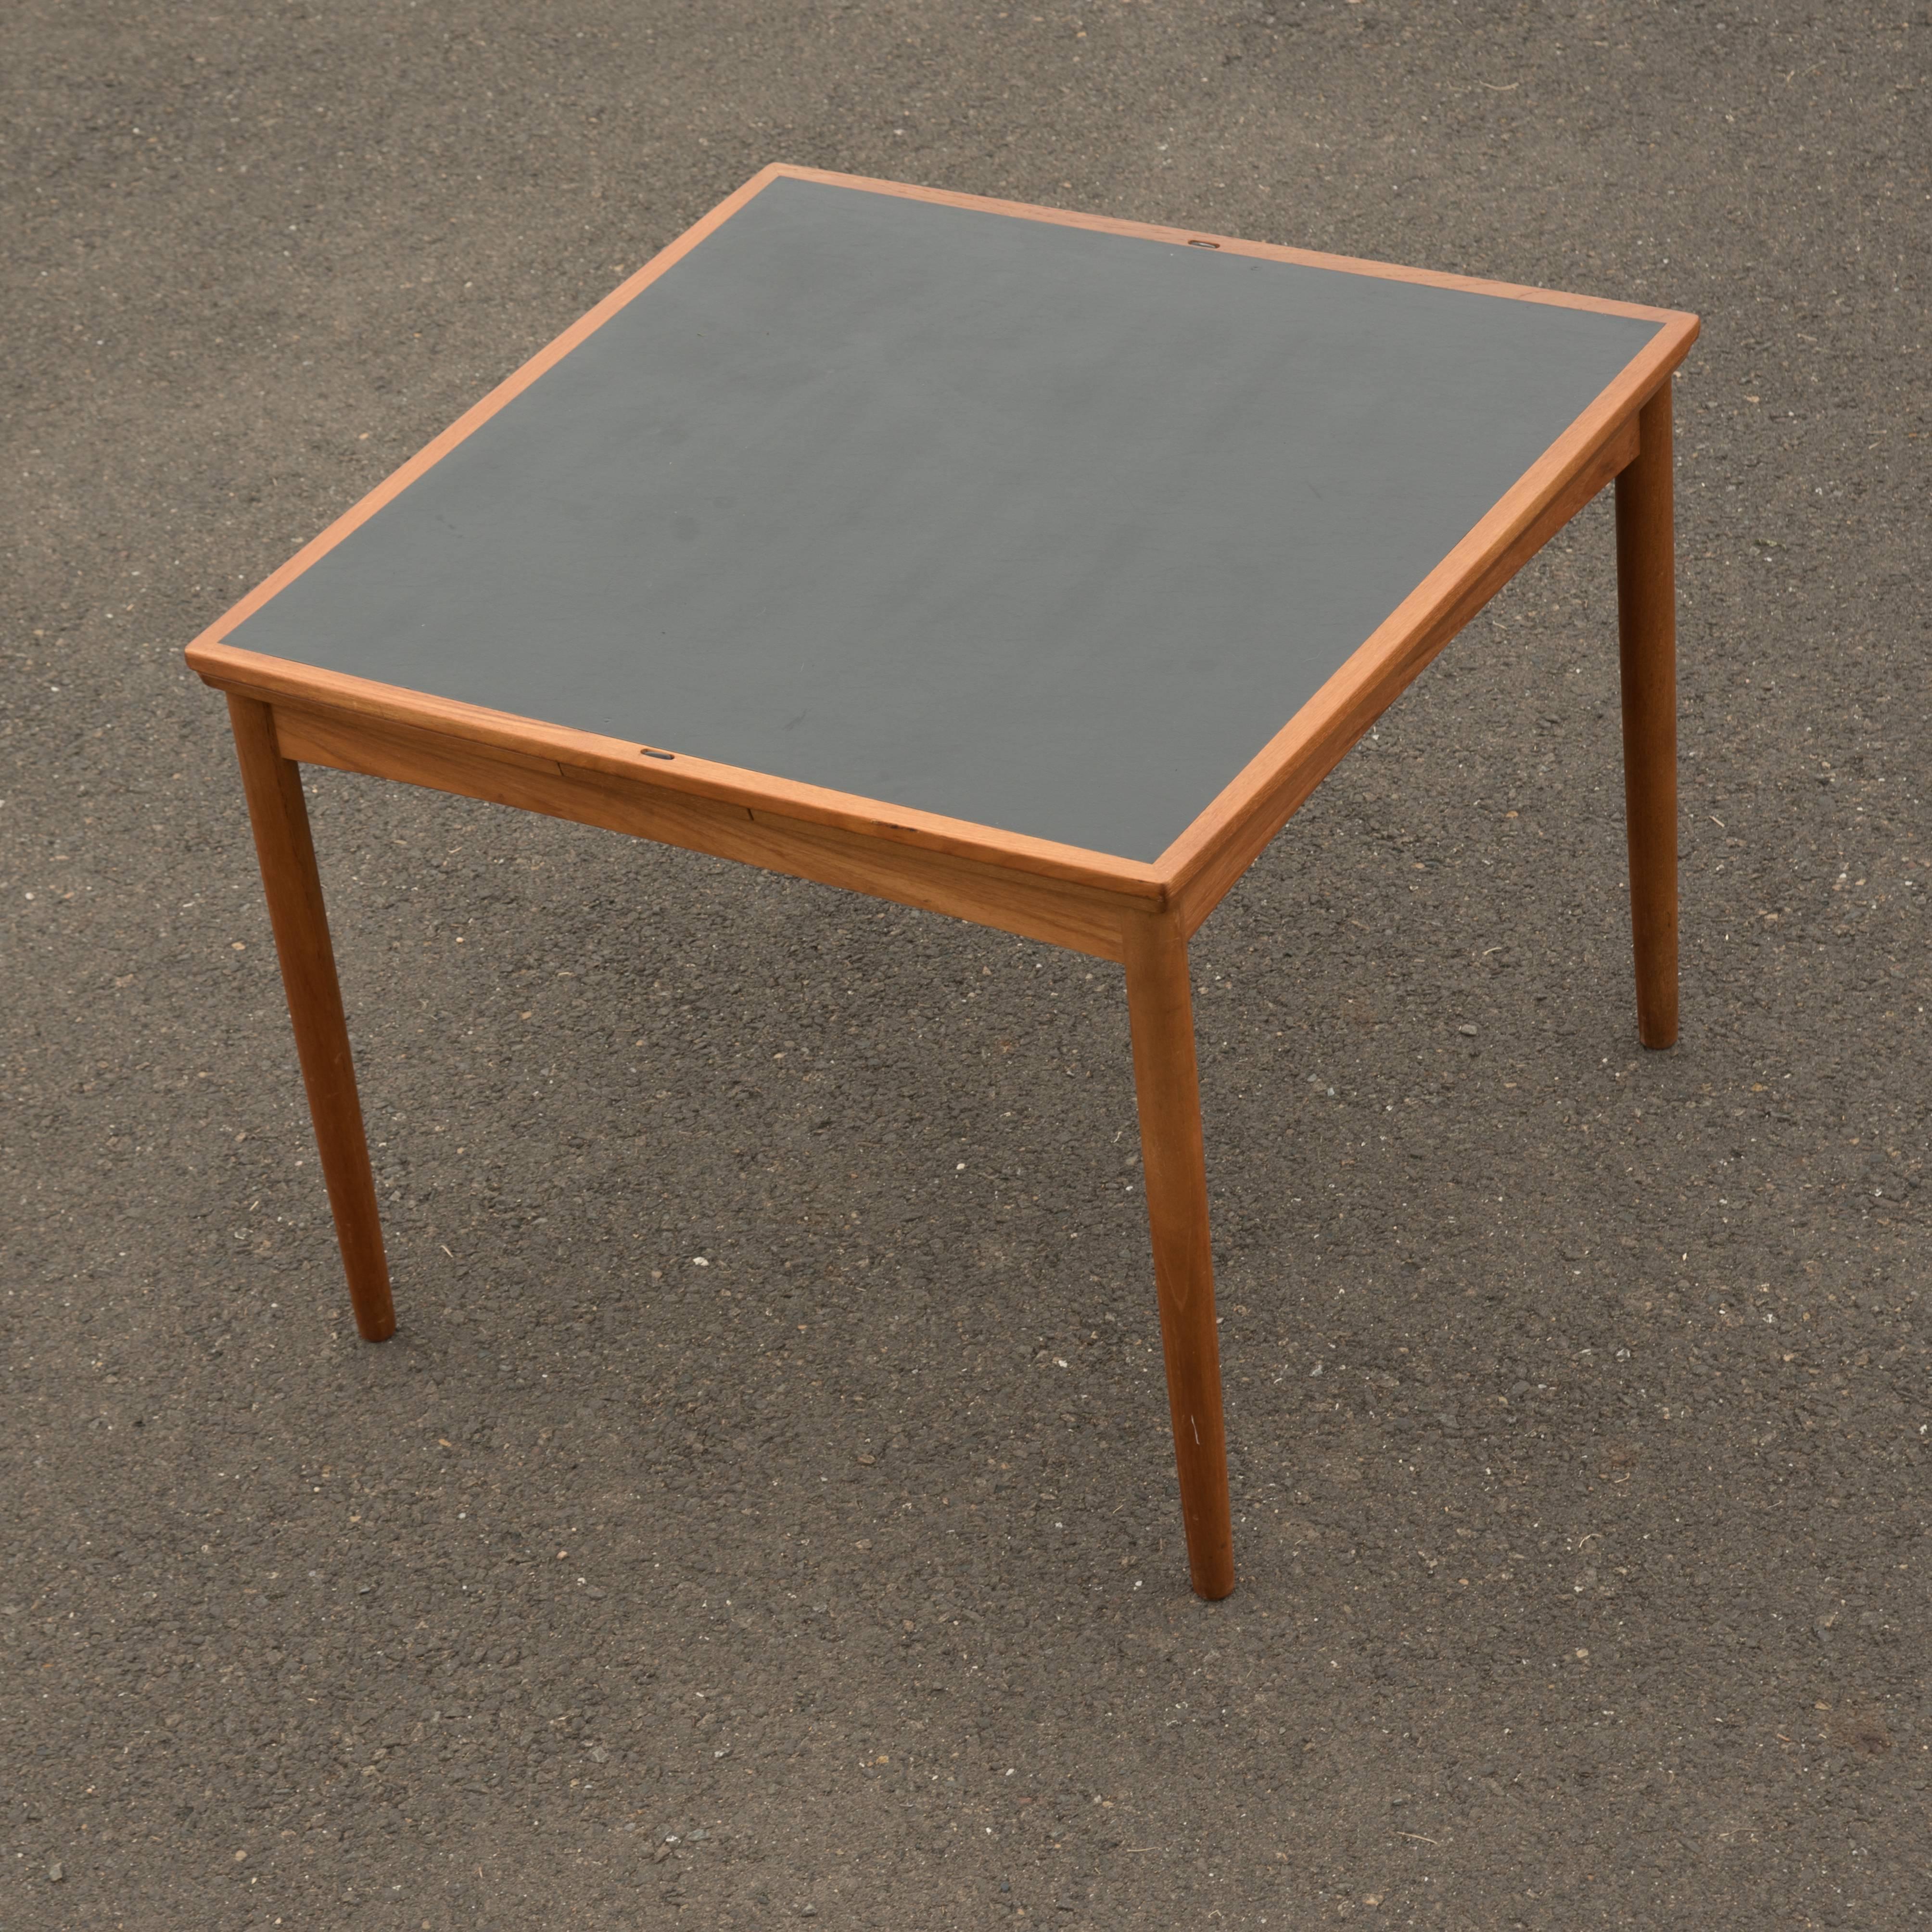 Sleek Mid-Century Modern Danish designed versatile table, made of light brown teak with a top that that flips over and becomes a black faux leather surface for playing cards or games. Two leaves easily slide out and up on two sides to create a